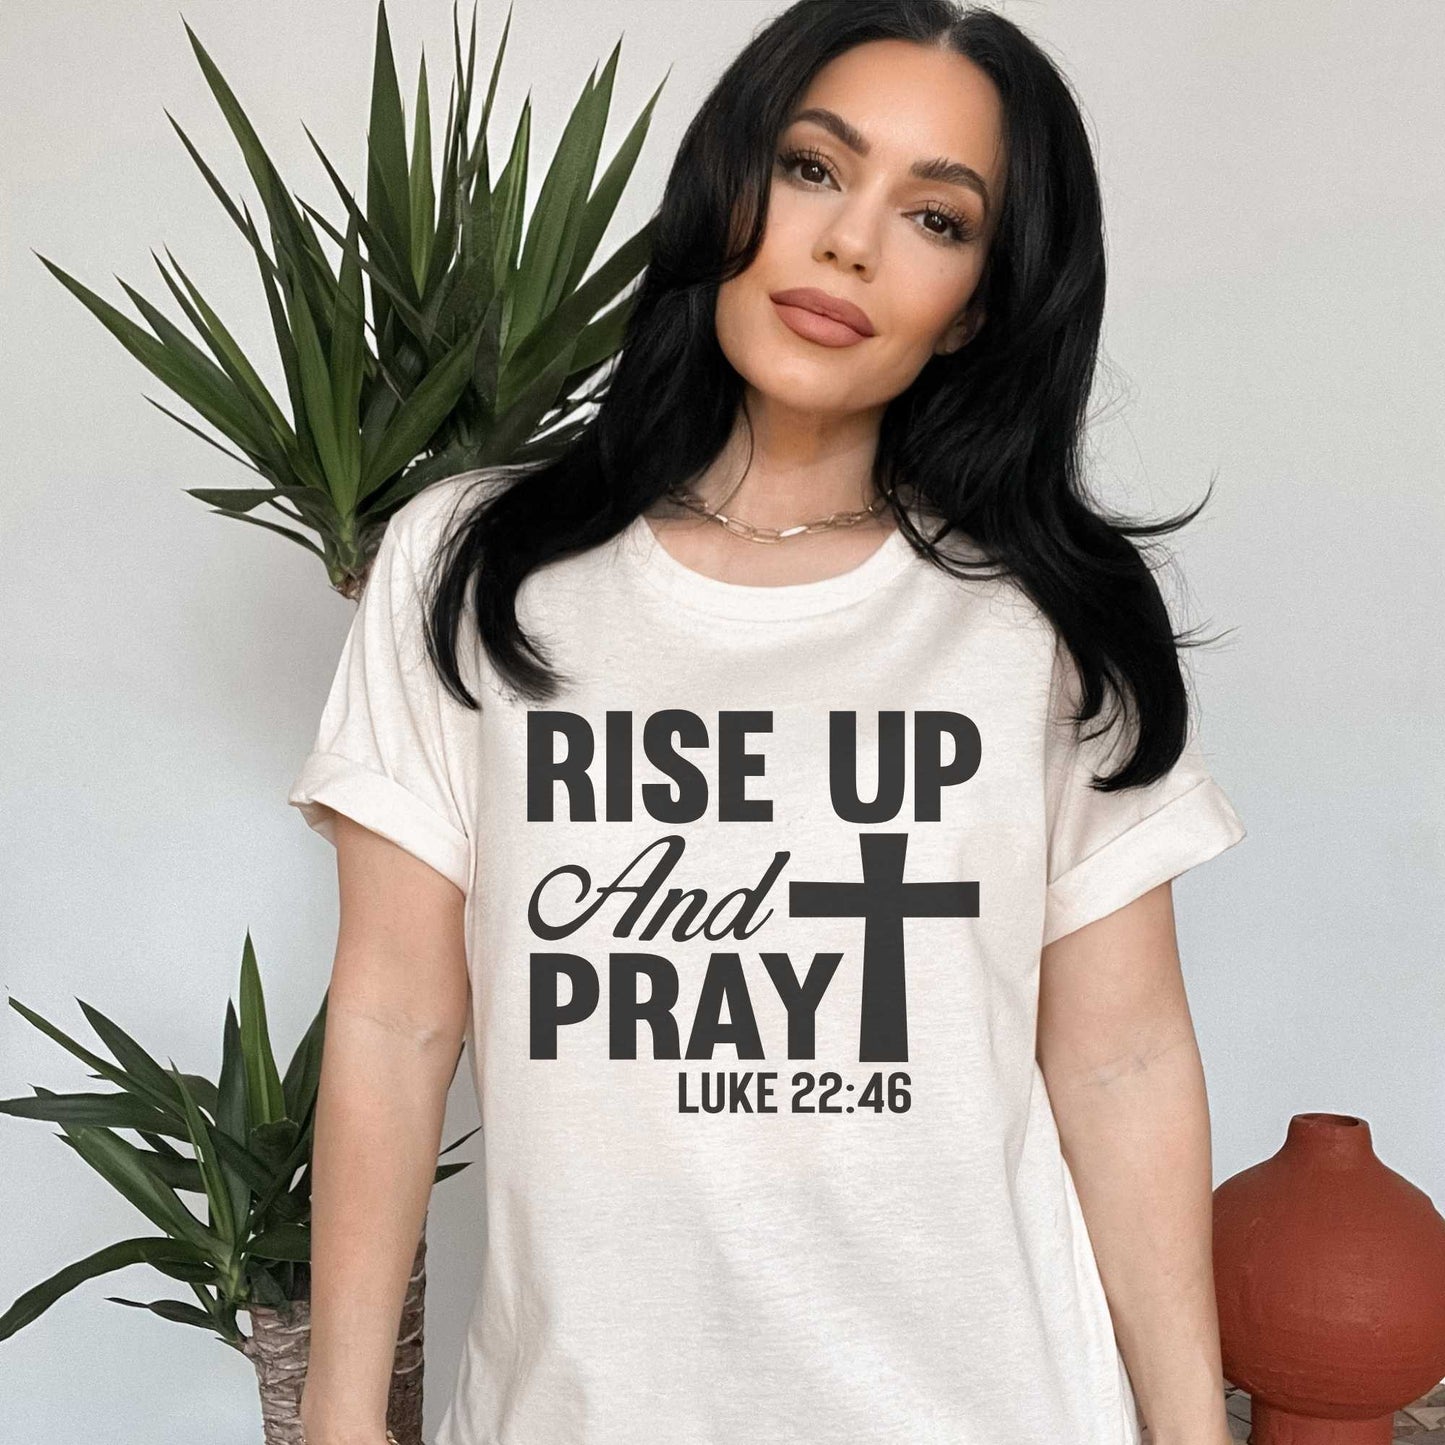 Rise Up and Pray Shirt about God for Women